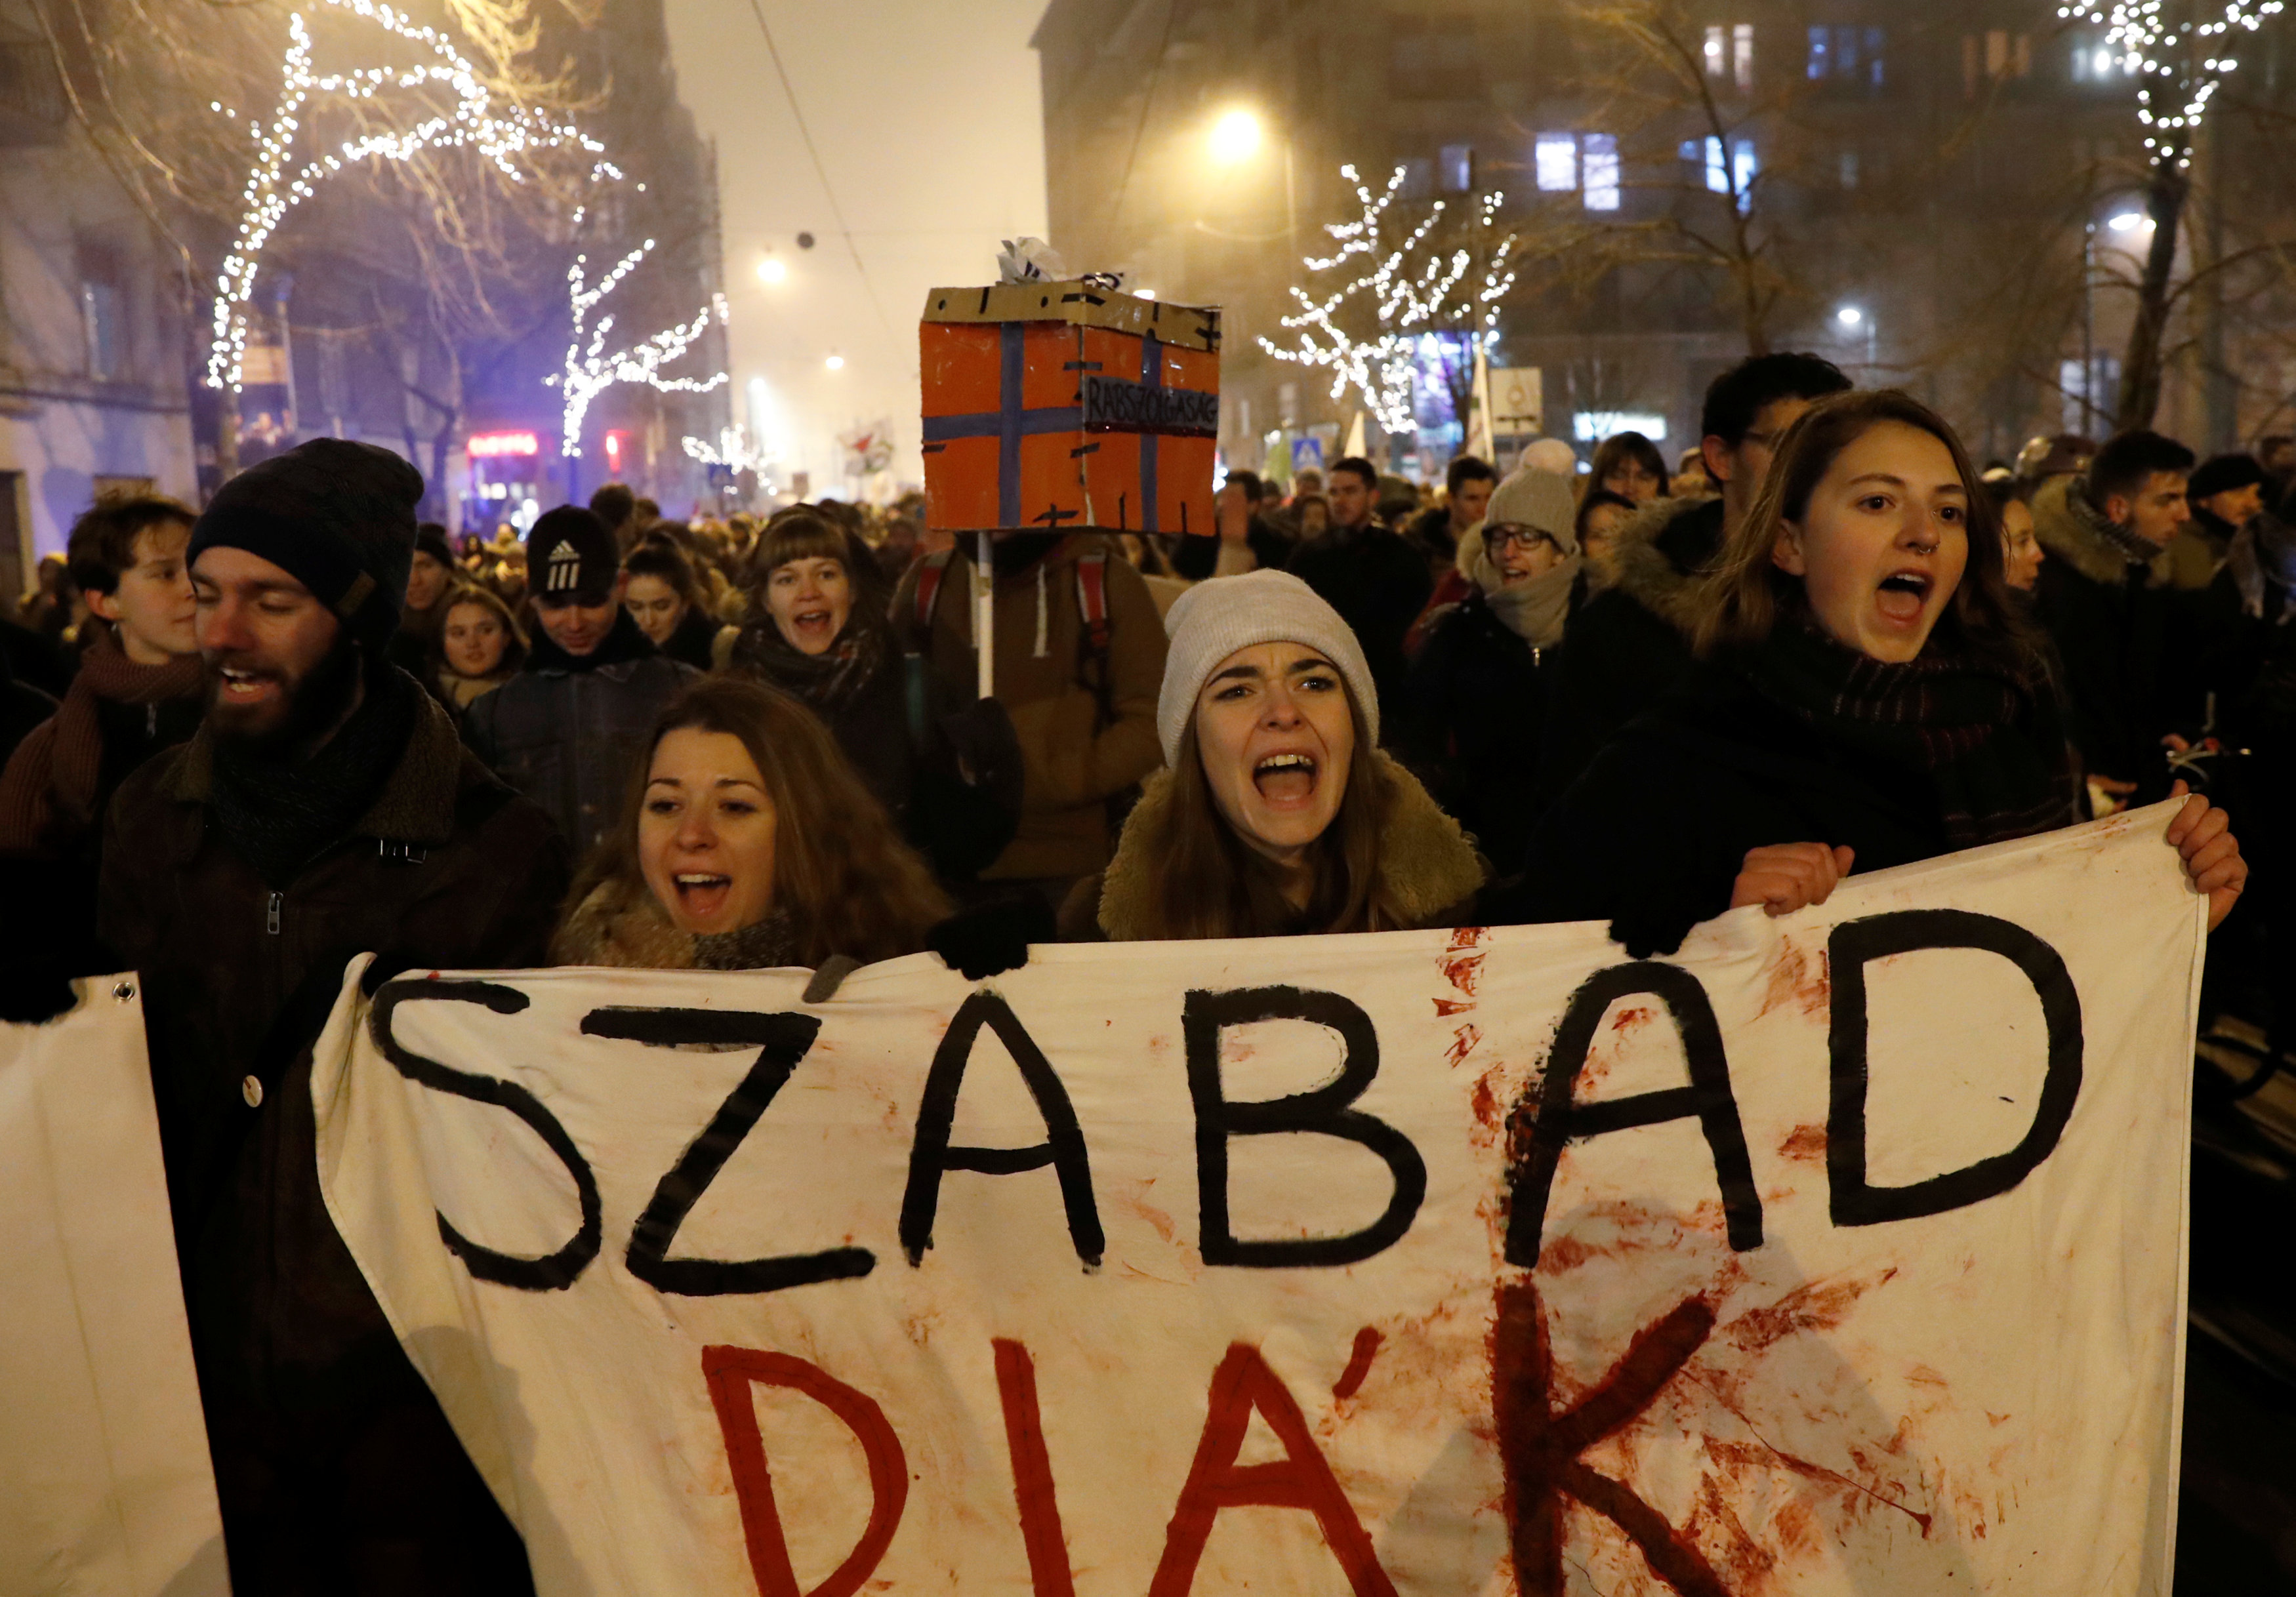 2018-12-13T172010Z_1067472956_RC129B3D0C90_RTRMADP_3_HUNGARY-PROTESTS